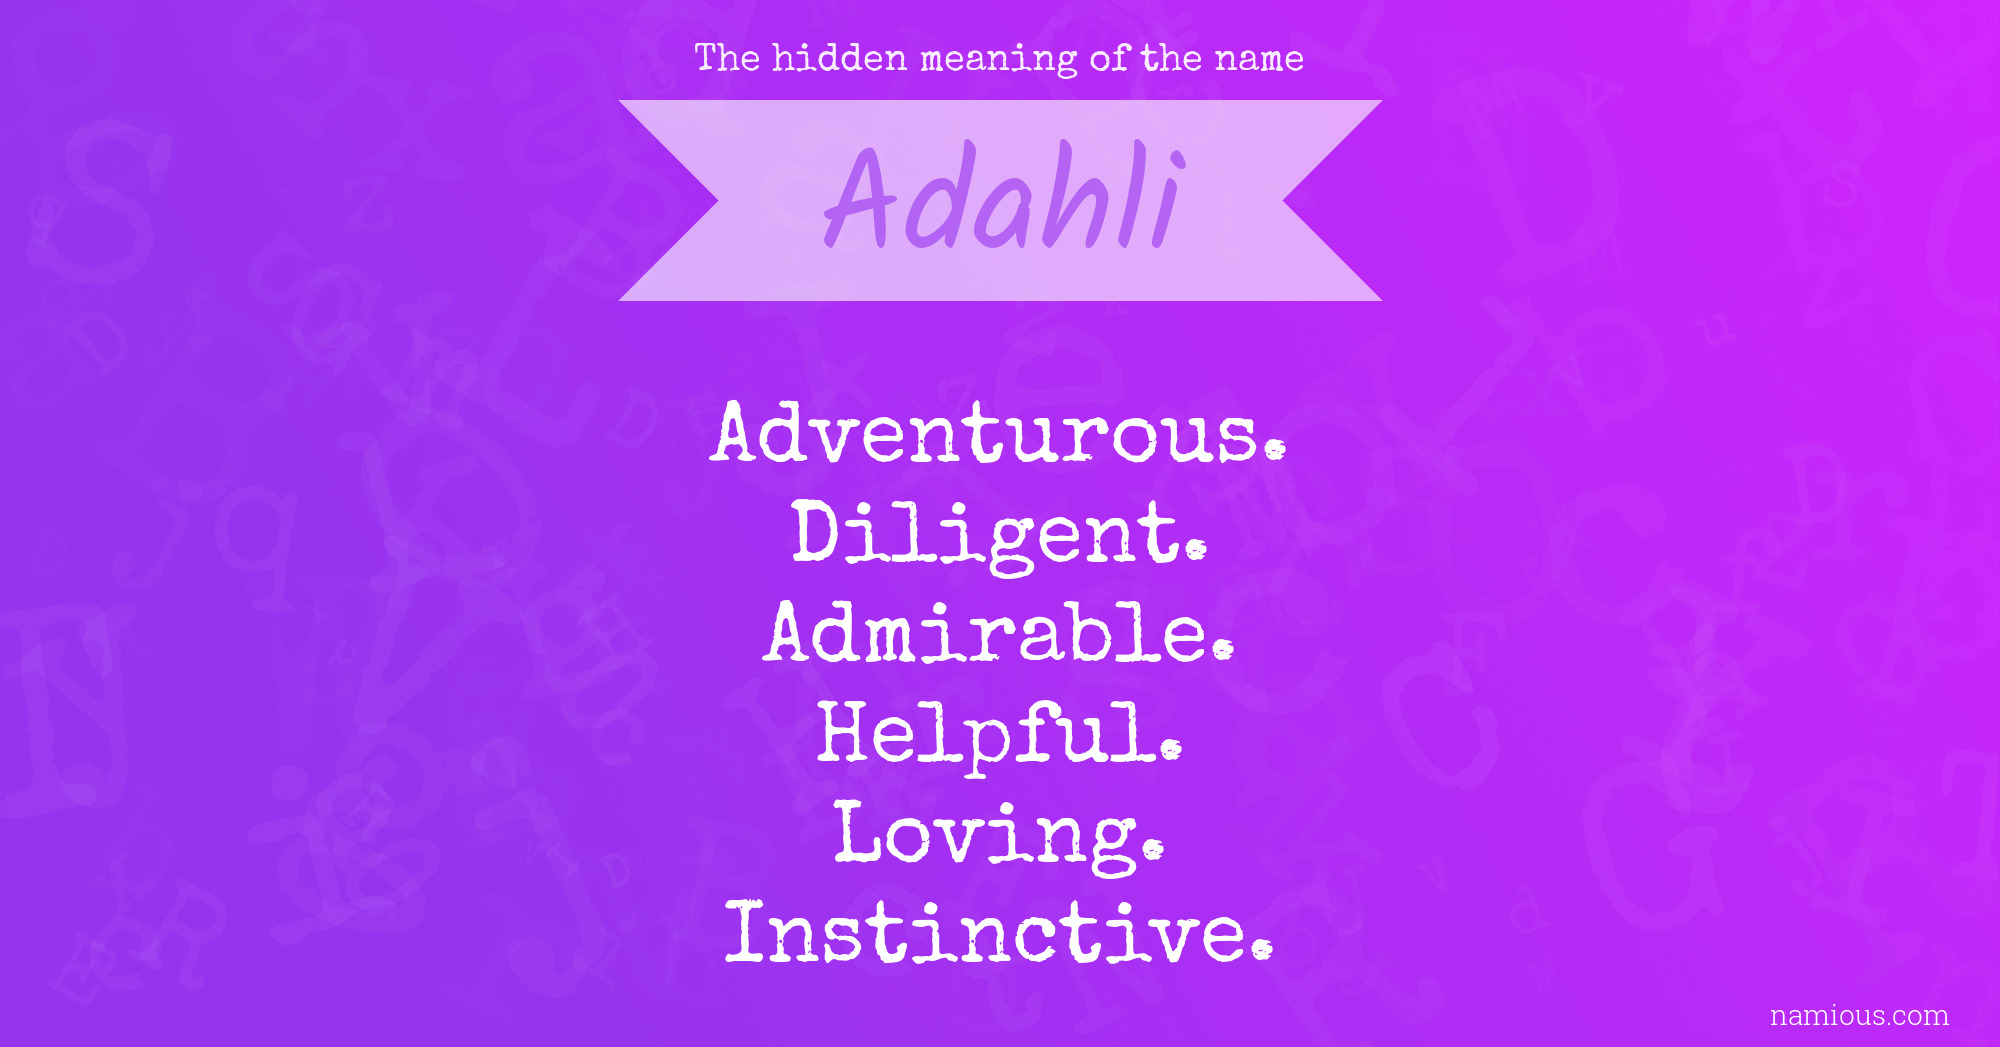 The hidden meaning of the name Adahli